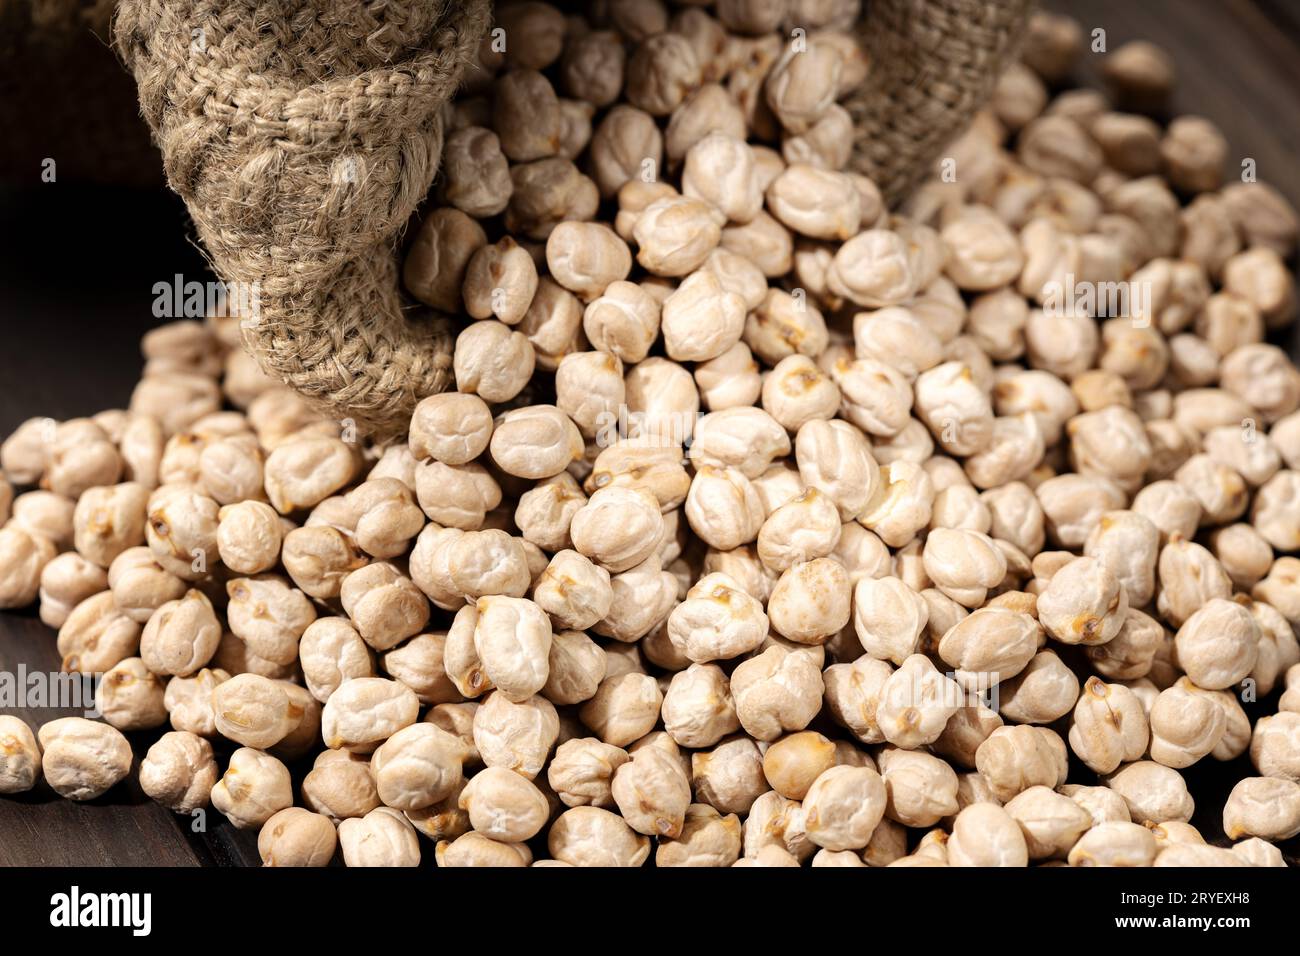 Close up of Uncooked Chickpeas on rustic wooden table Stock Photo